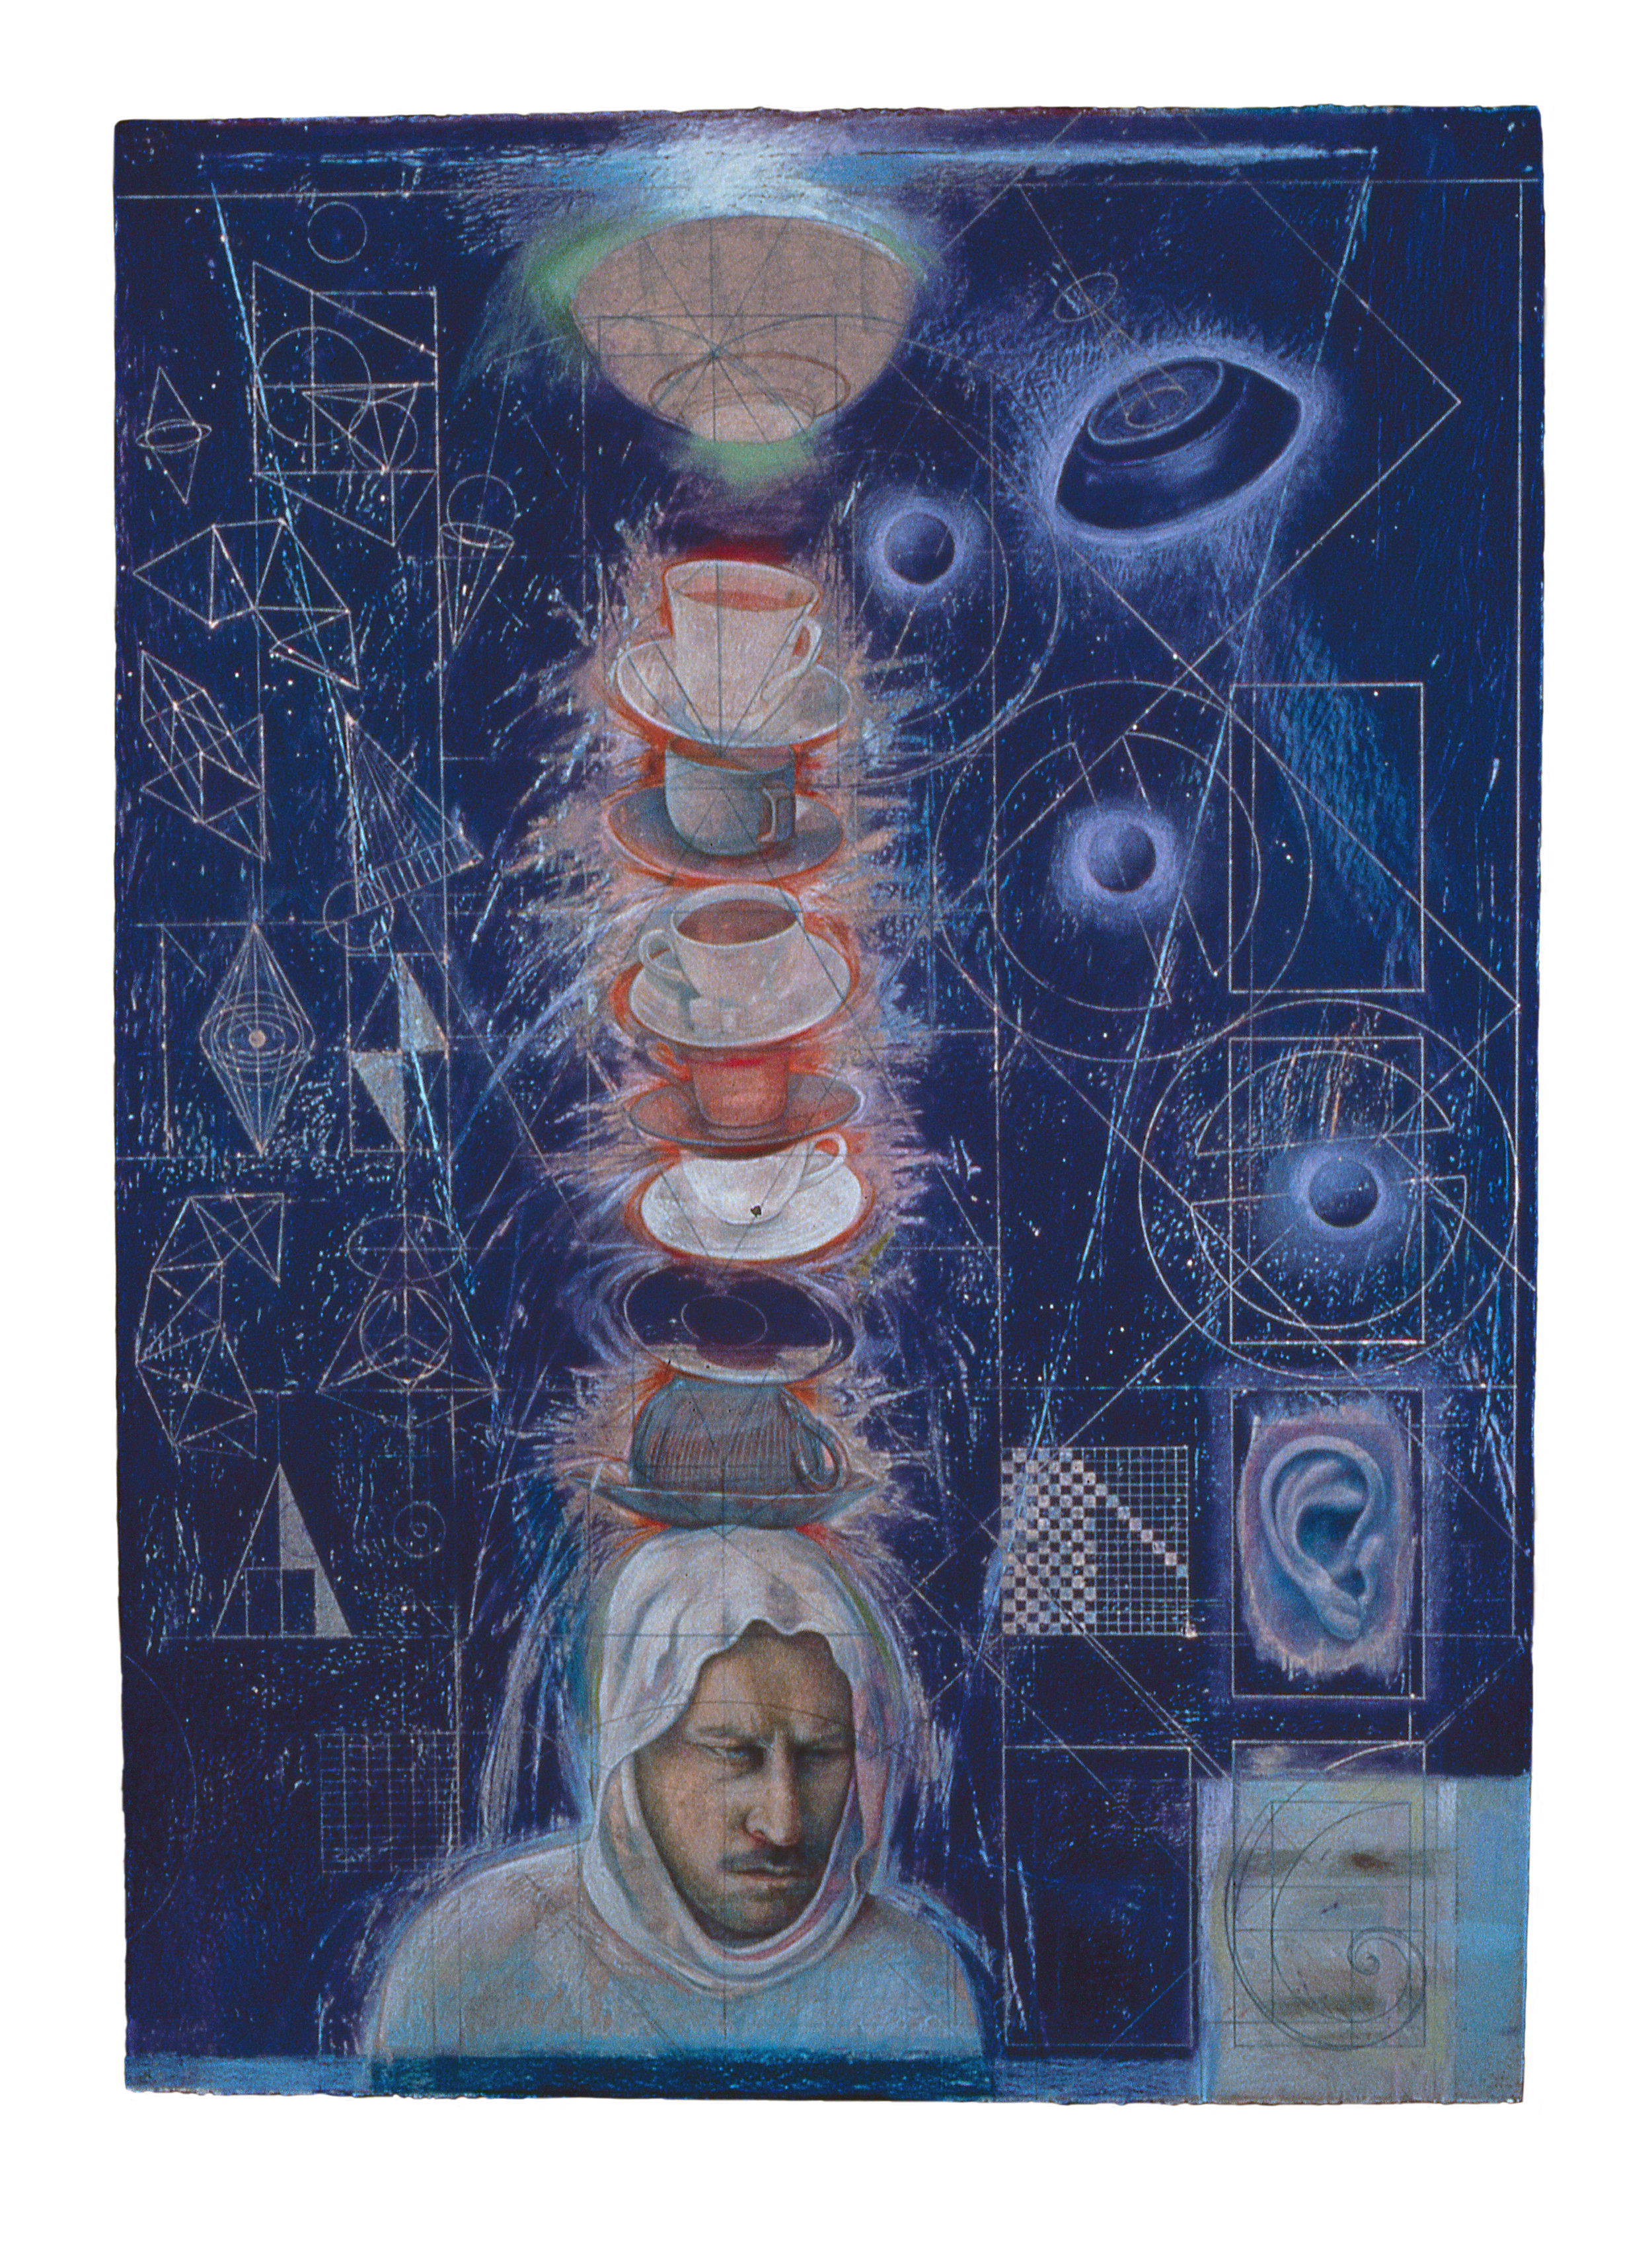 Self-Portrait in Disguise, with Some Illuminations, 1992